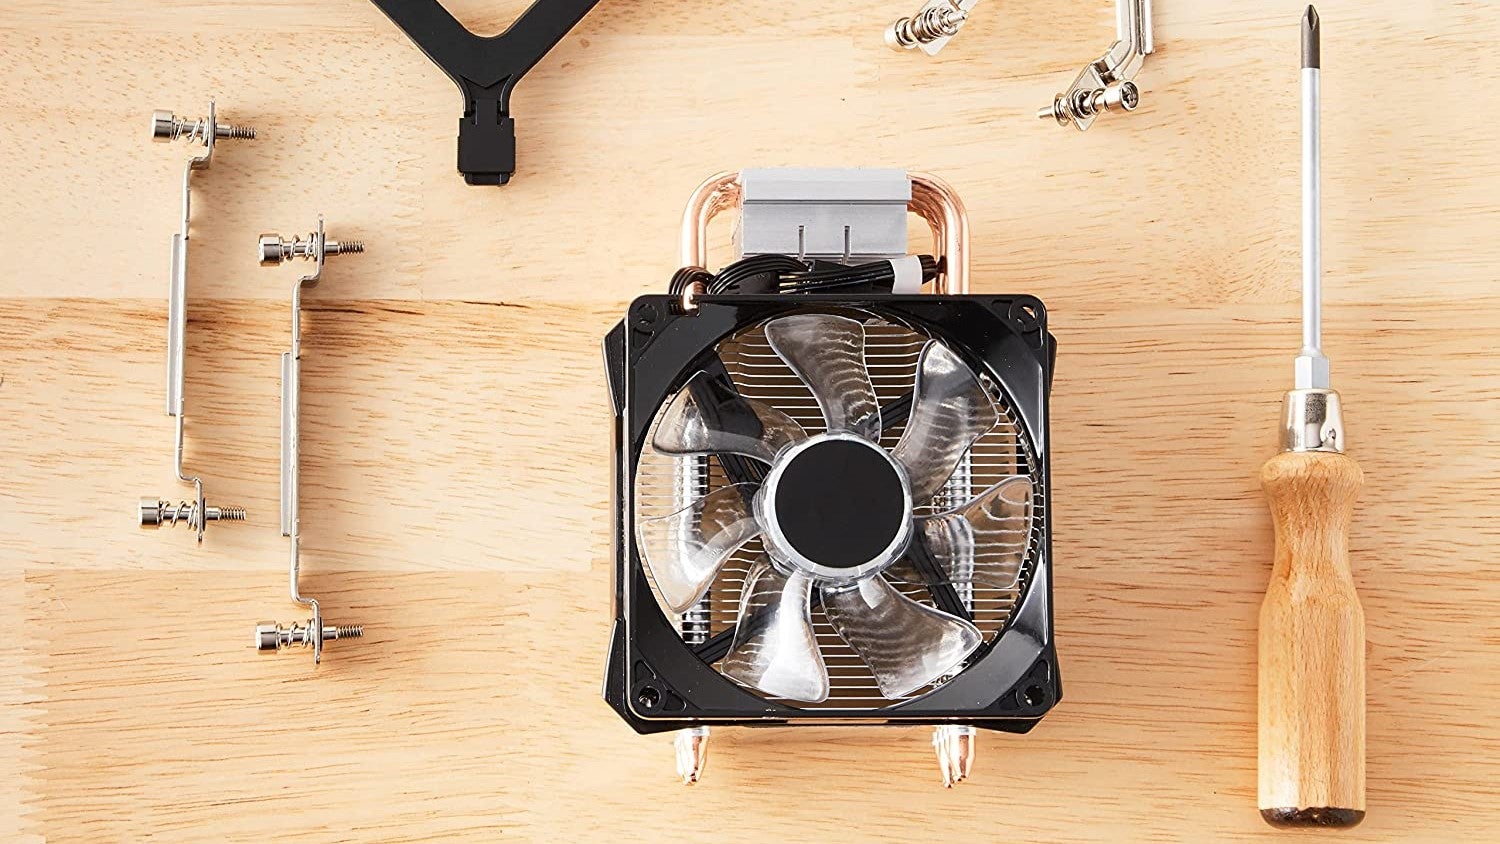 The Amazon Basics Computer Cooling Fan on a table, next to some of its mounting hardware and a screwdriver.